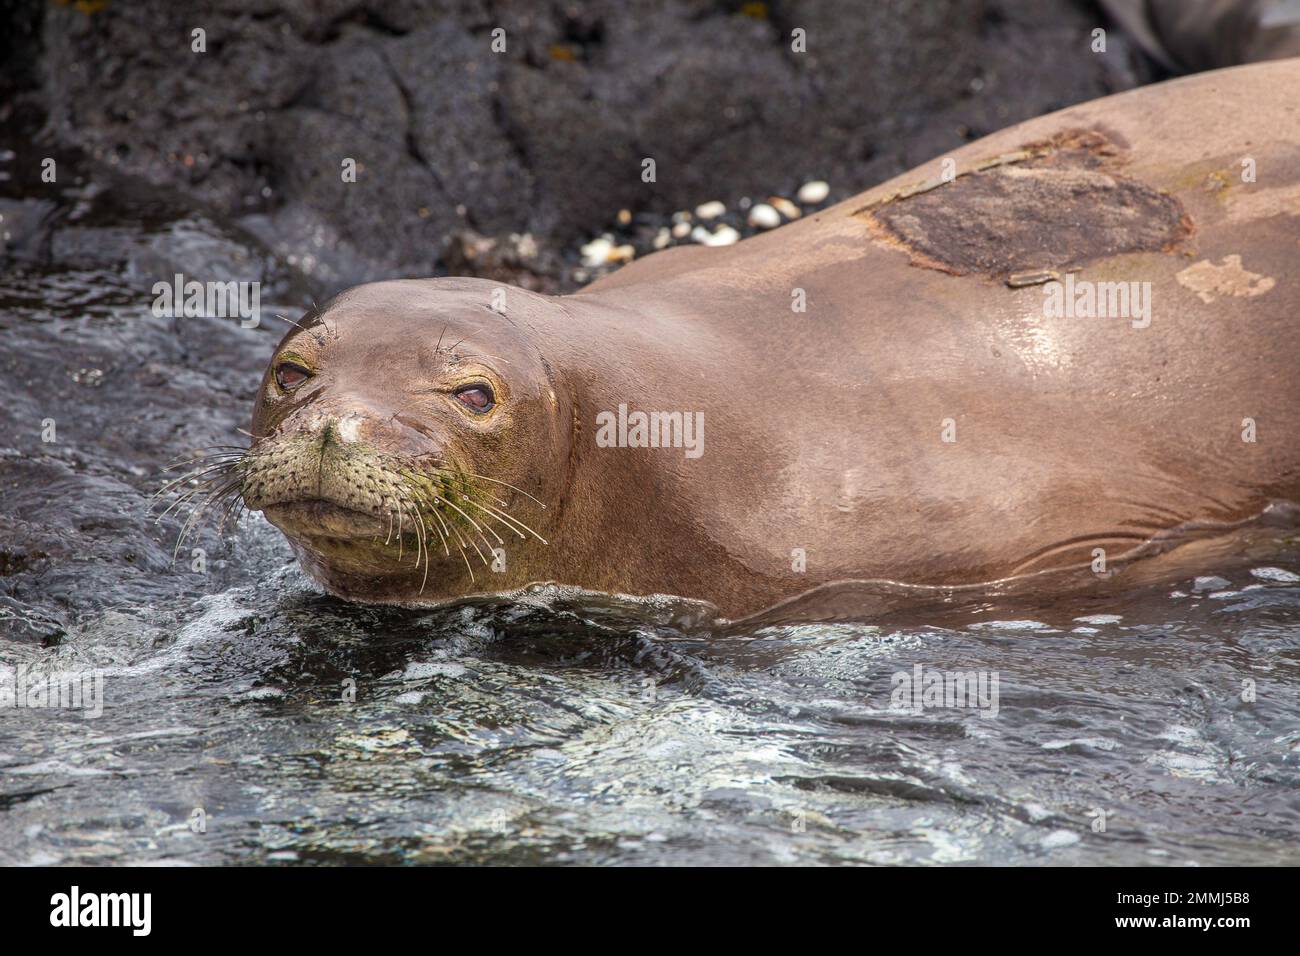 This Hawaiian monk seal, Neomonachus schauinslandi, (endemic and endangered) was photographed off the Kona Coast of the Big Island, Hawaii. The patch Stock Photo